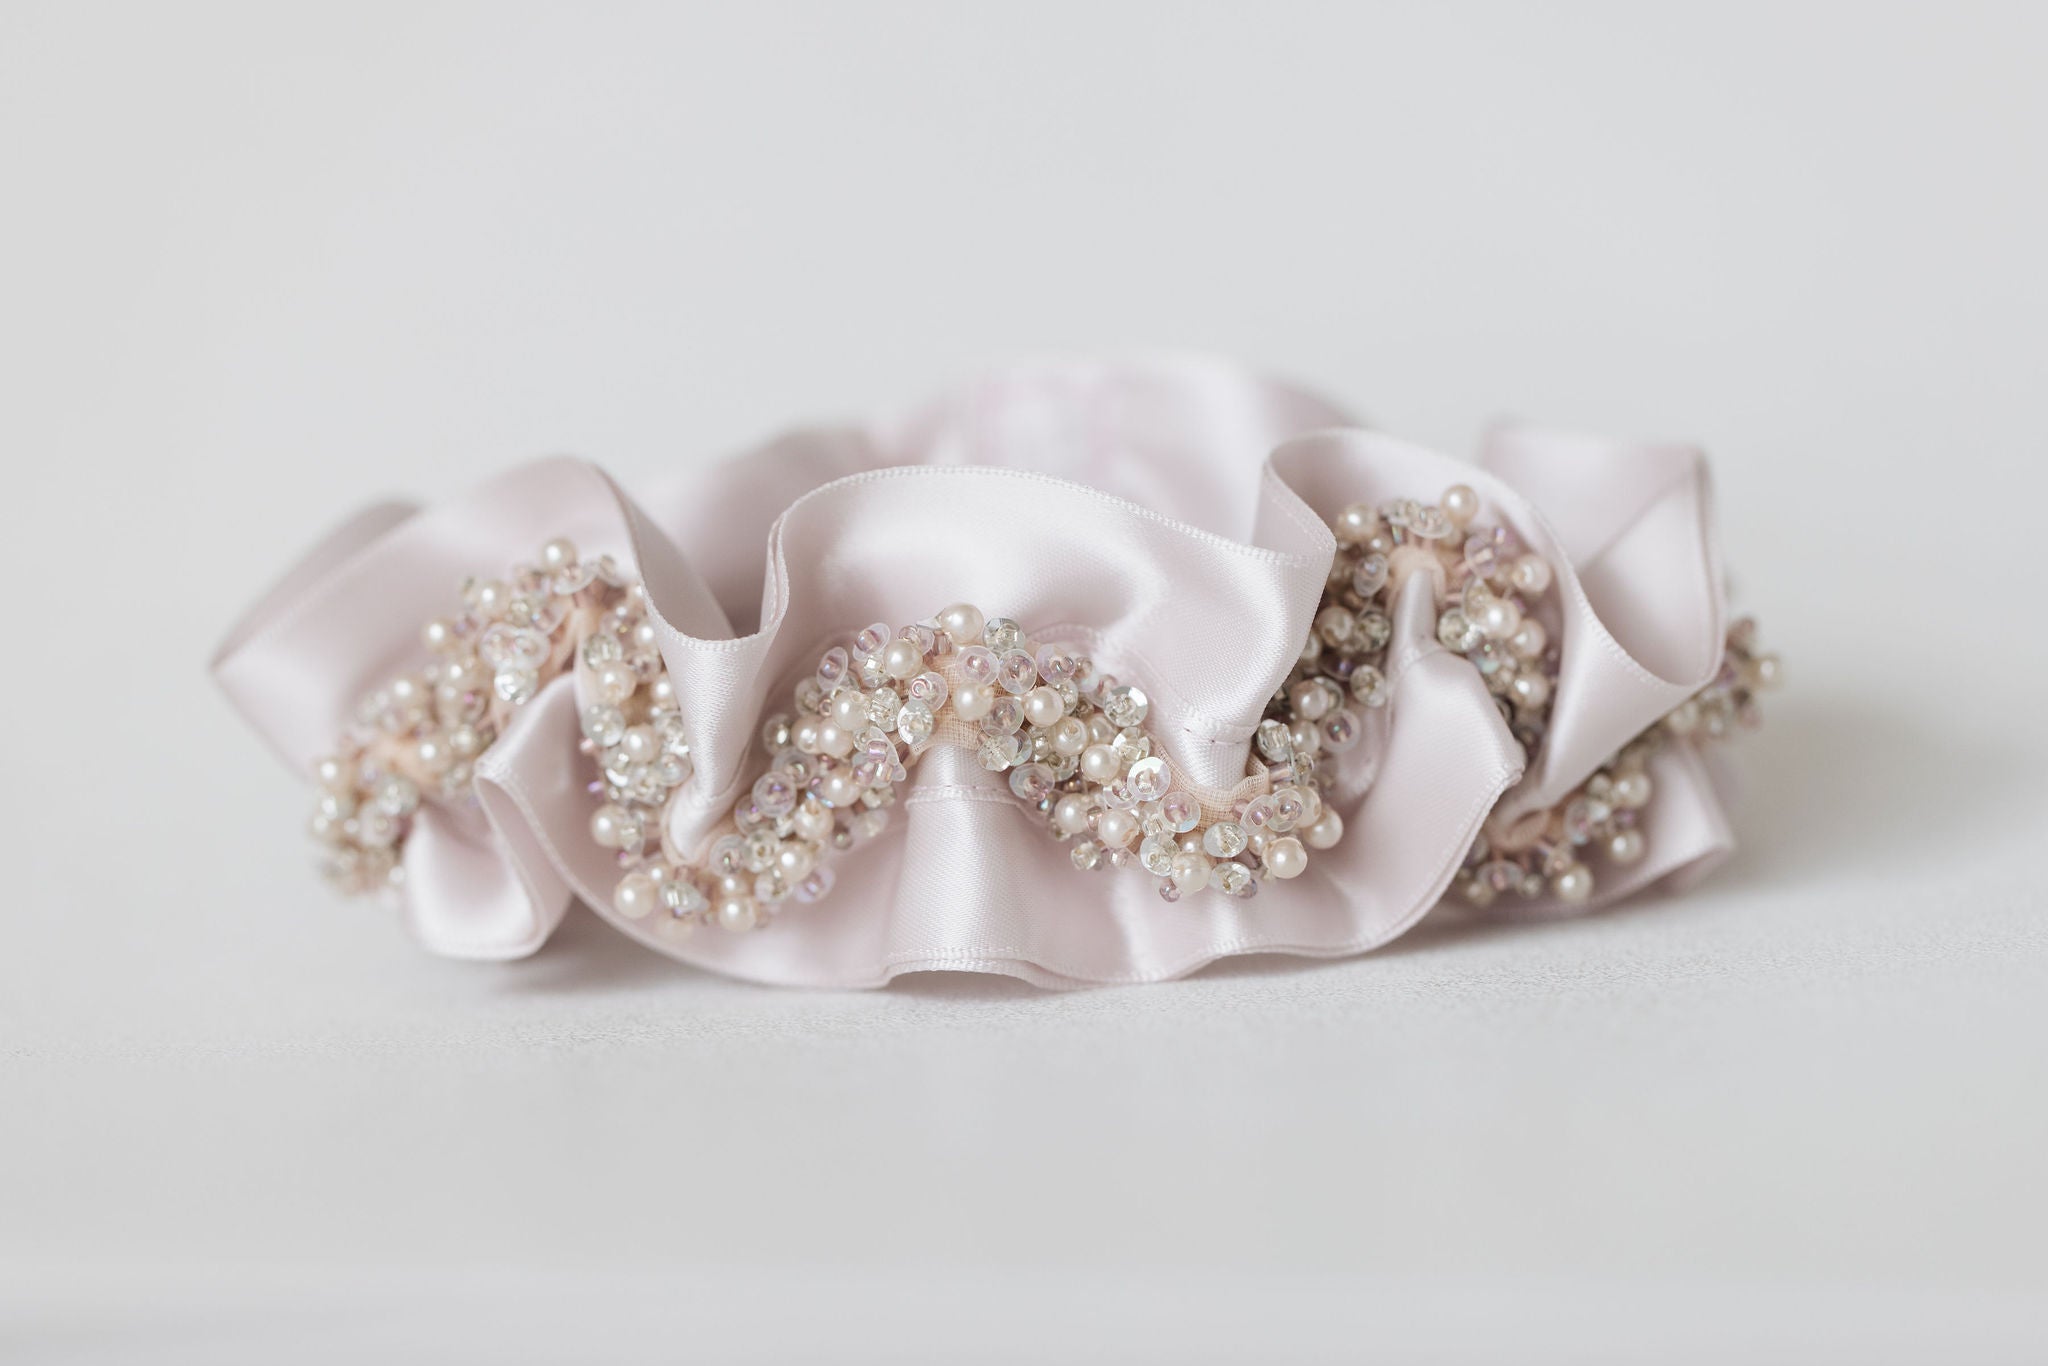 blush wedding garter heirloom with sparkle and beads handmade with personalized embroidery by The Garter Girl